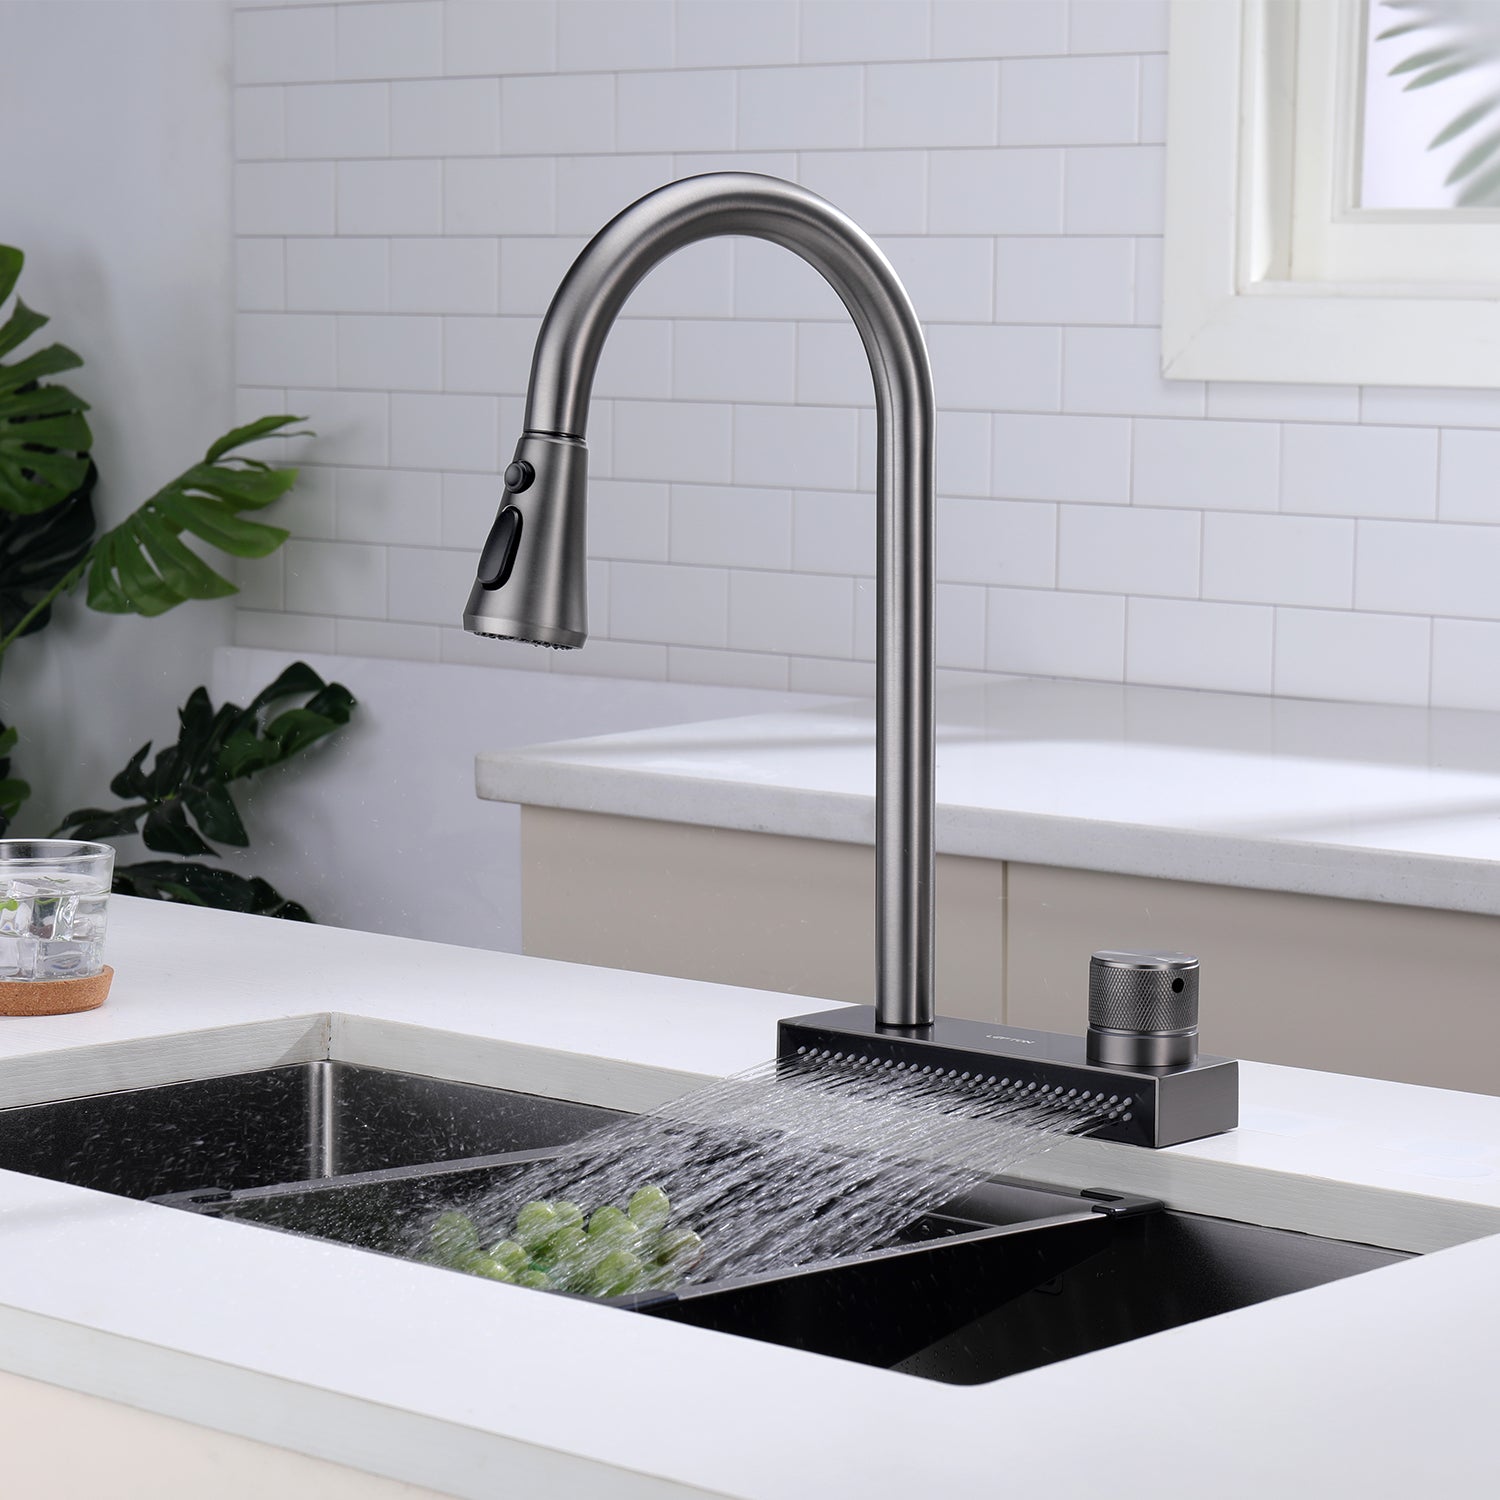 Lefton Stainless Steel Waterfall & Pull-Down Bifunctional Kitchen Faucet